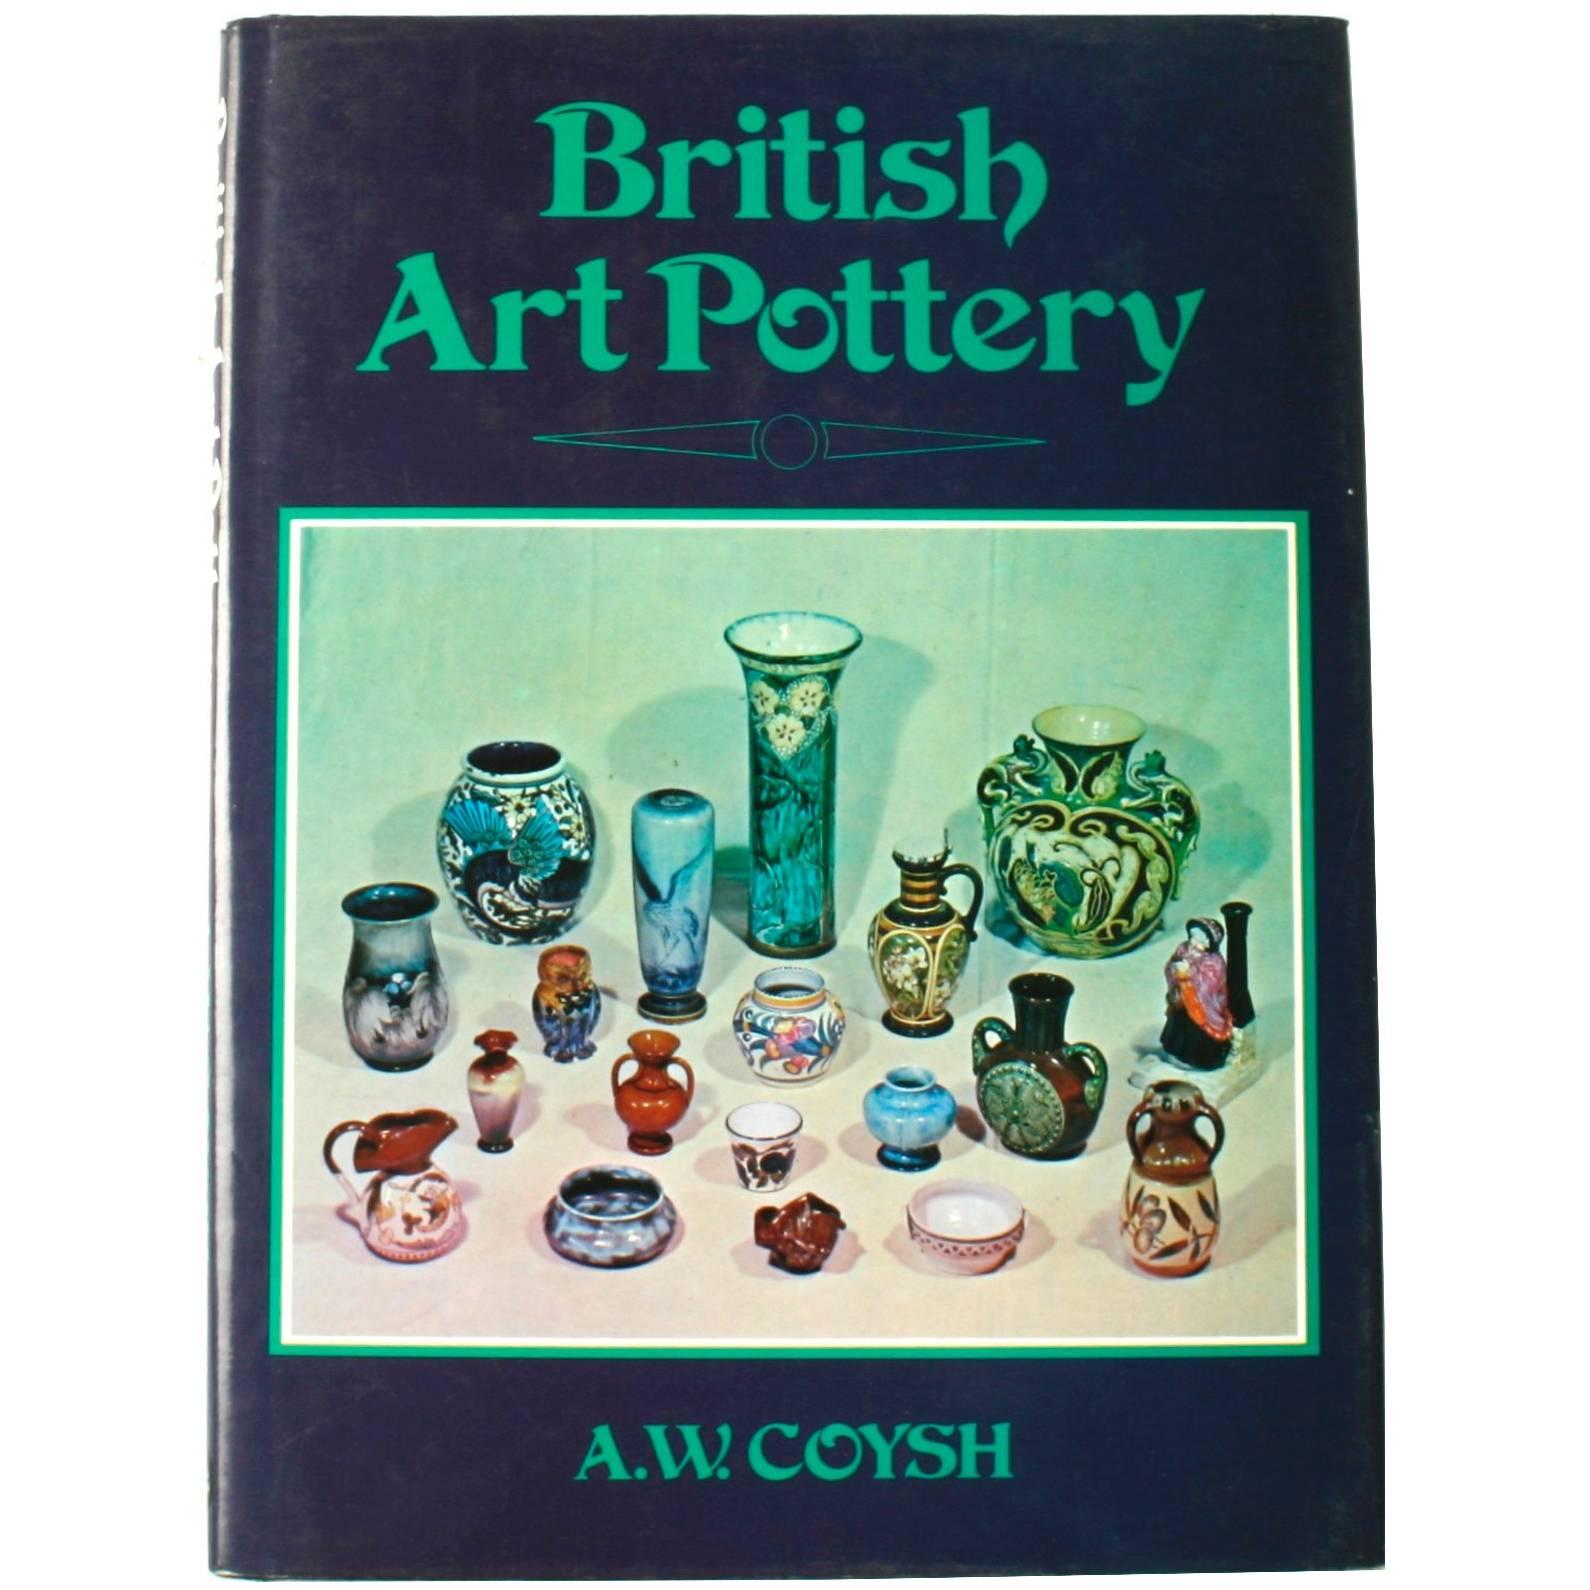 British Art Pottery by A.W. Coysh, First Edition